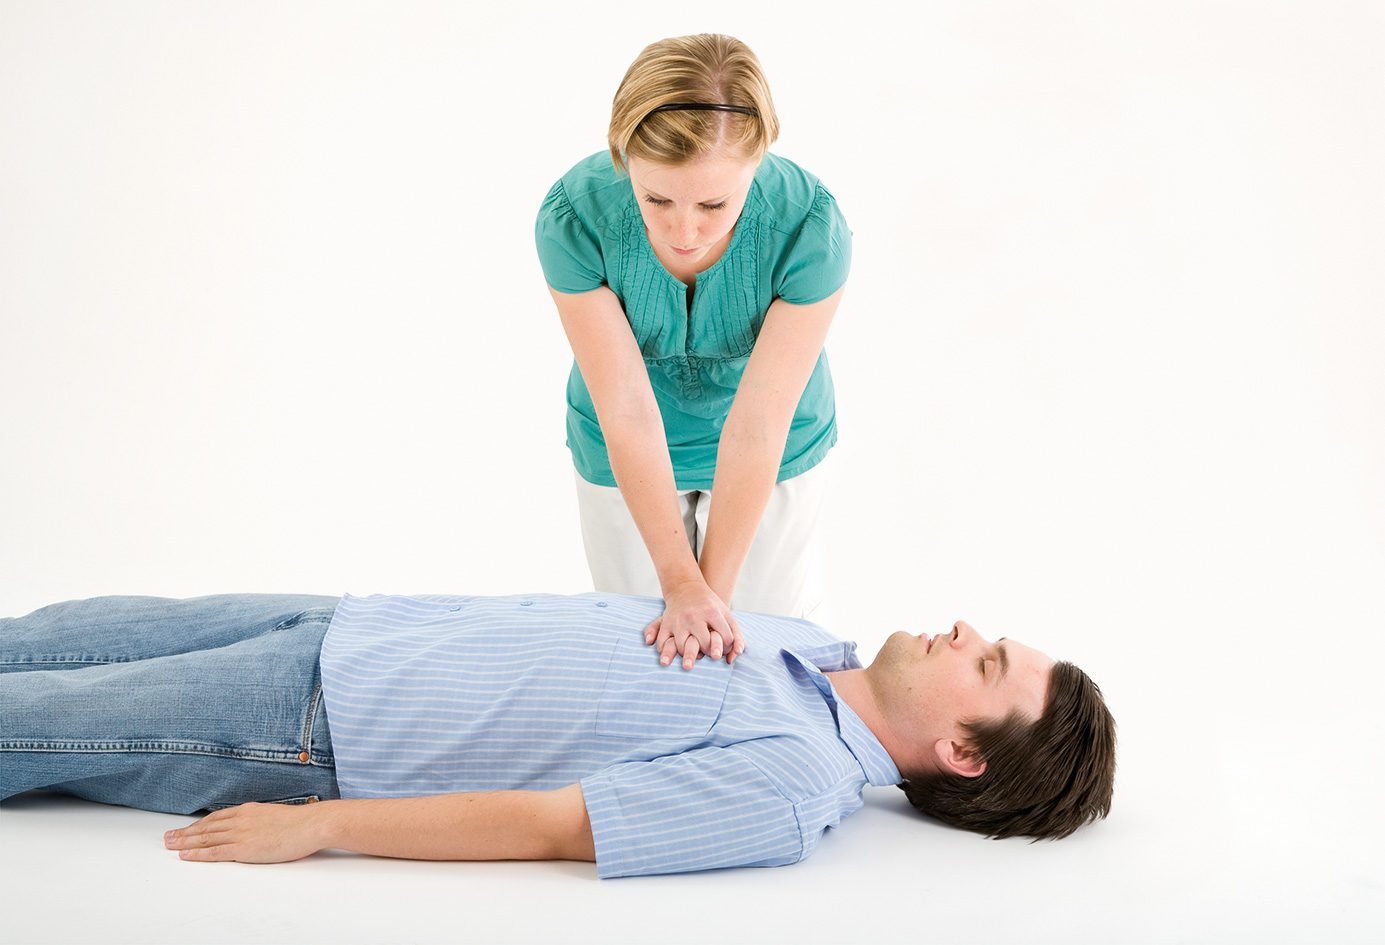 which adult victim requires high quality cpr